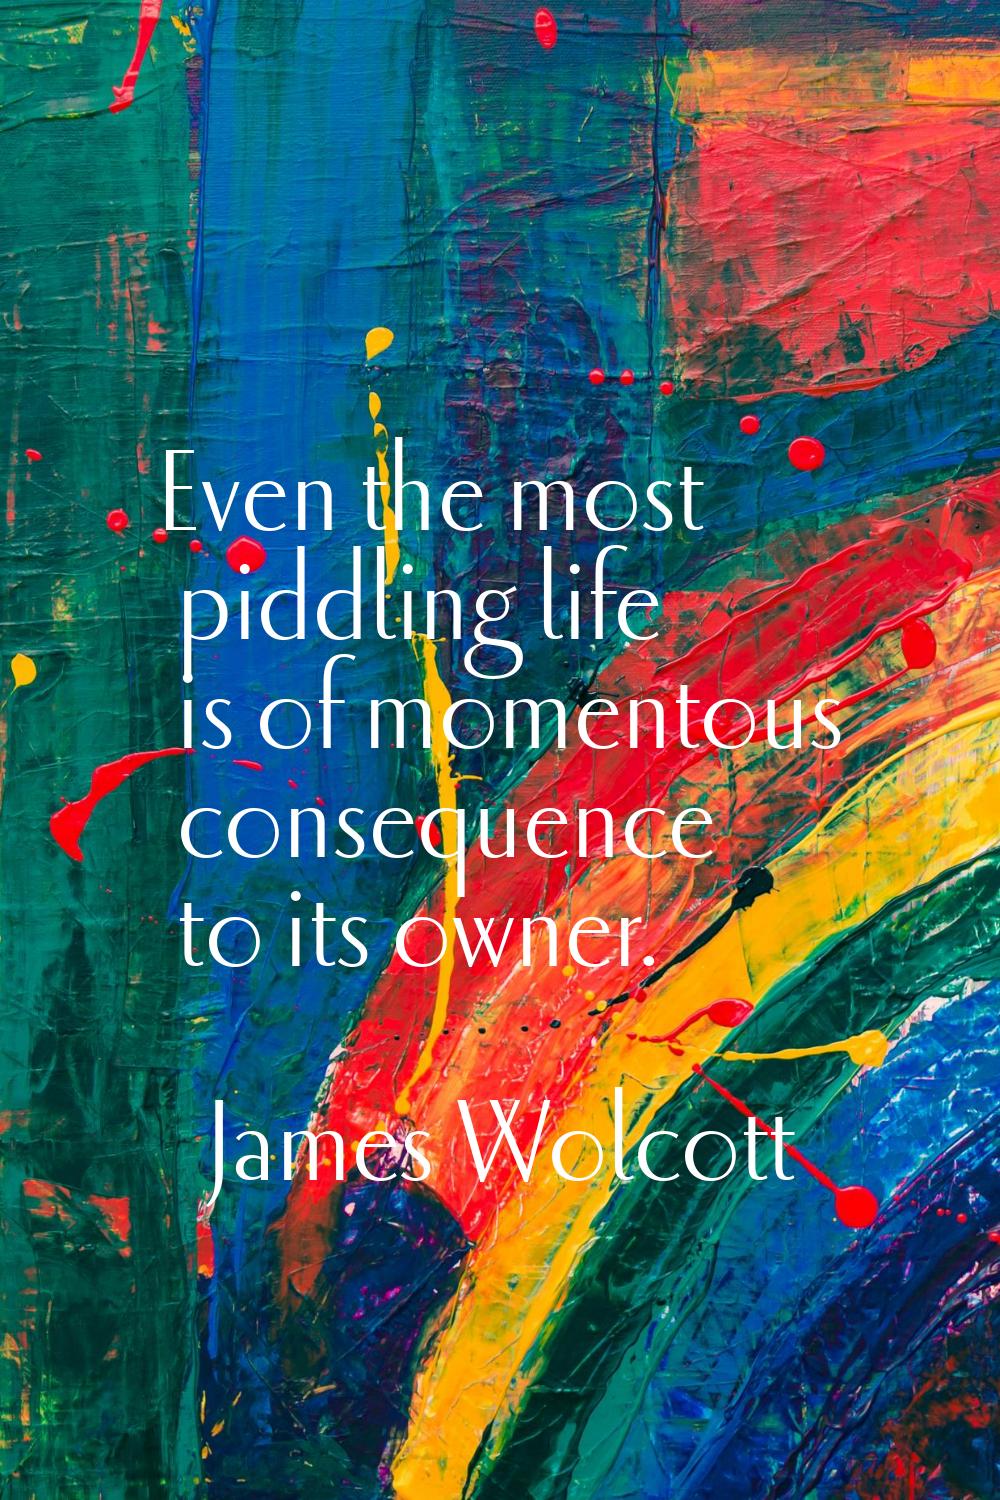 Even the most piddling life is of momentous consequence to its owner.